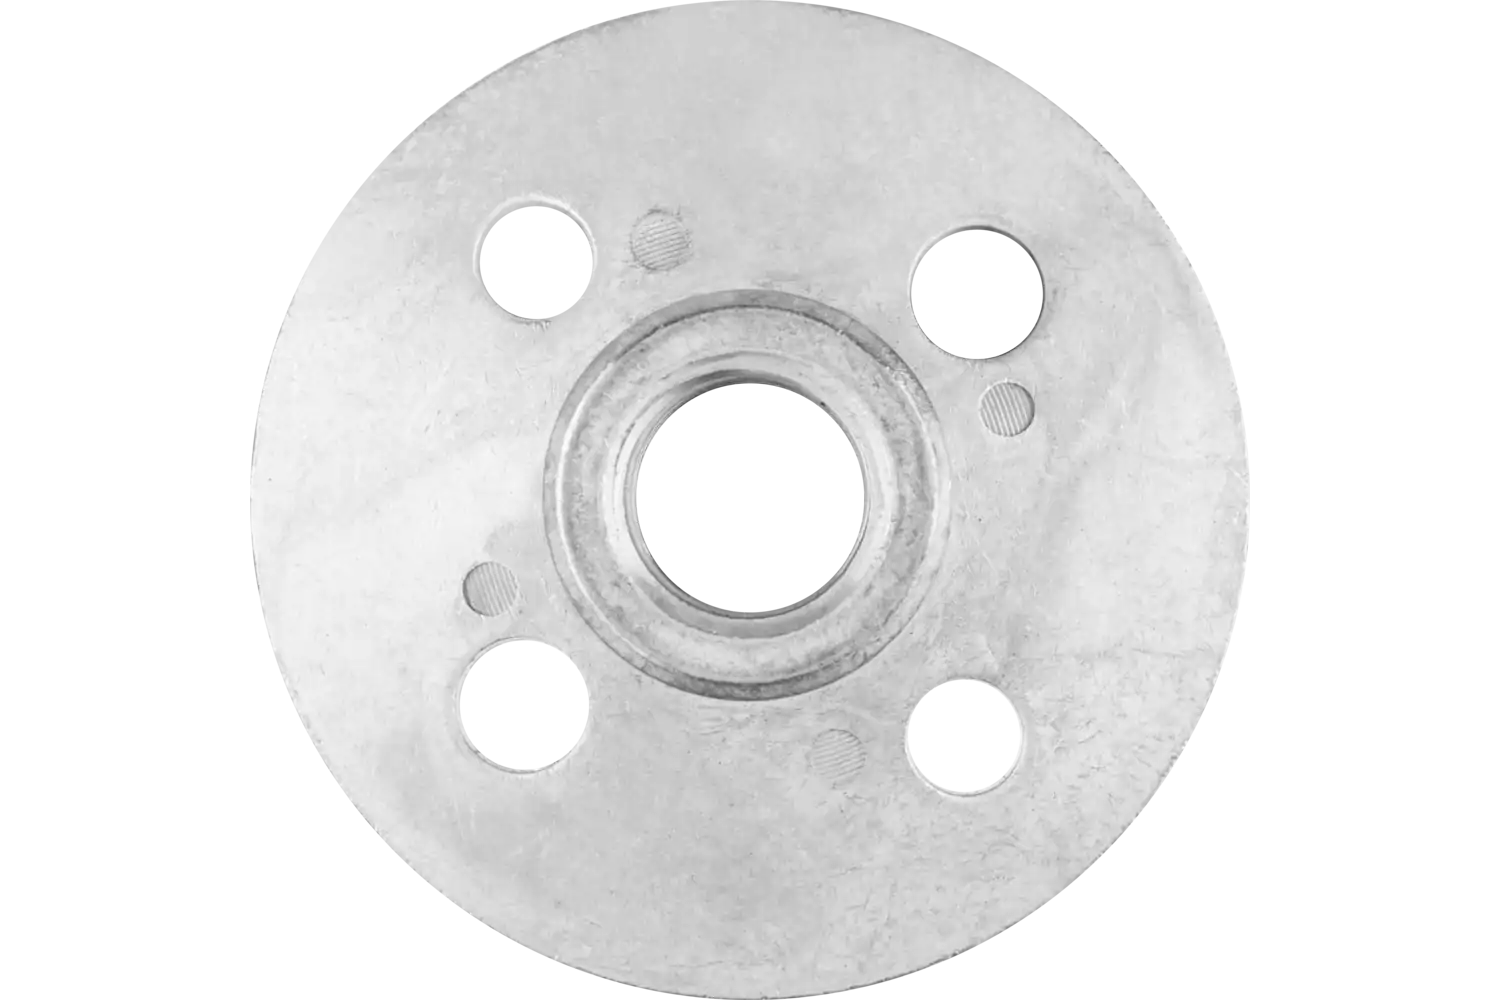 Fiber Disc Backing Pad Replacement Clamping Nut for 7"- 9 Backing Pads, 5/8-11 1